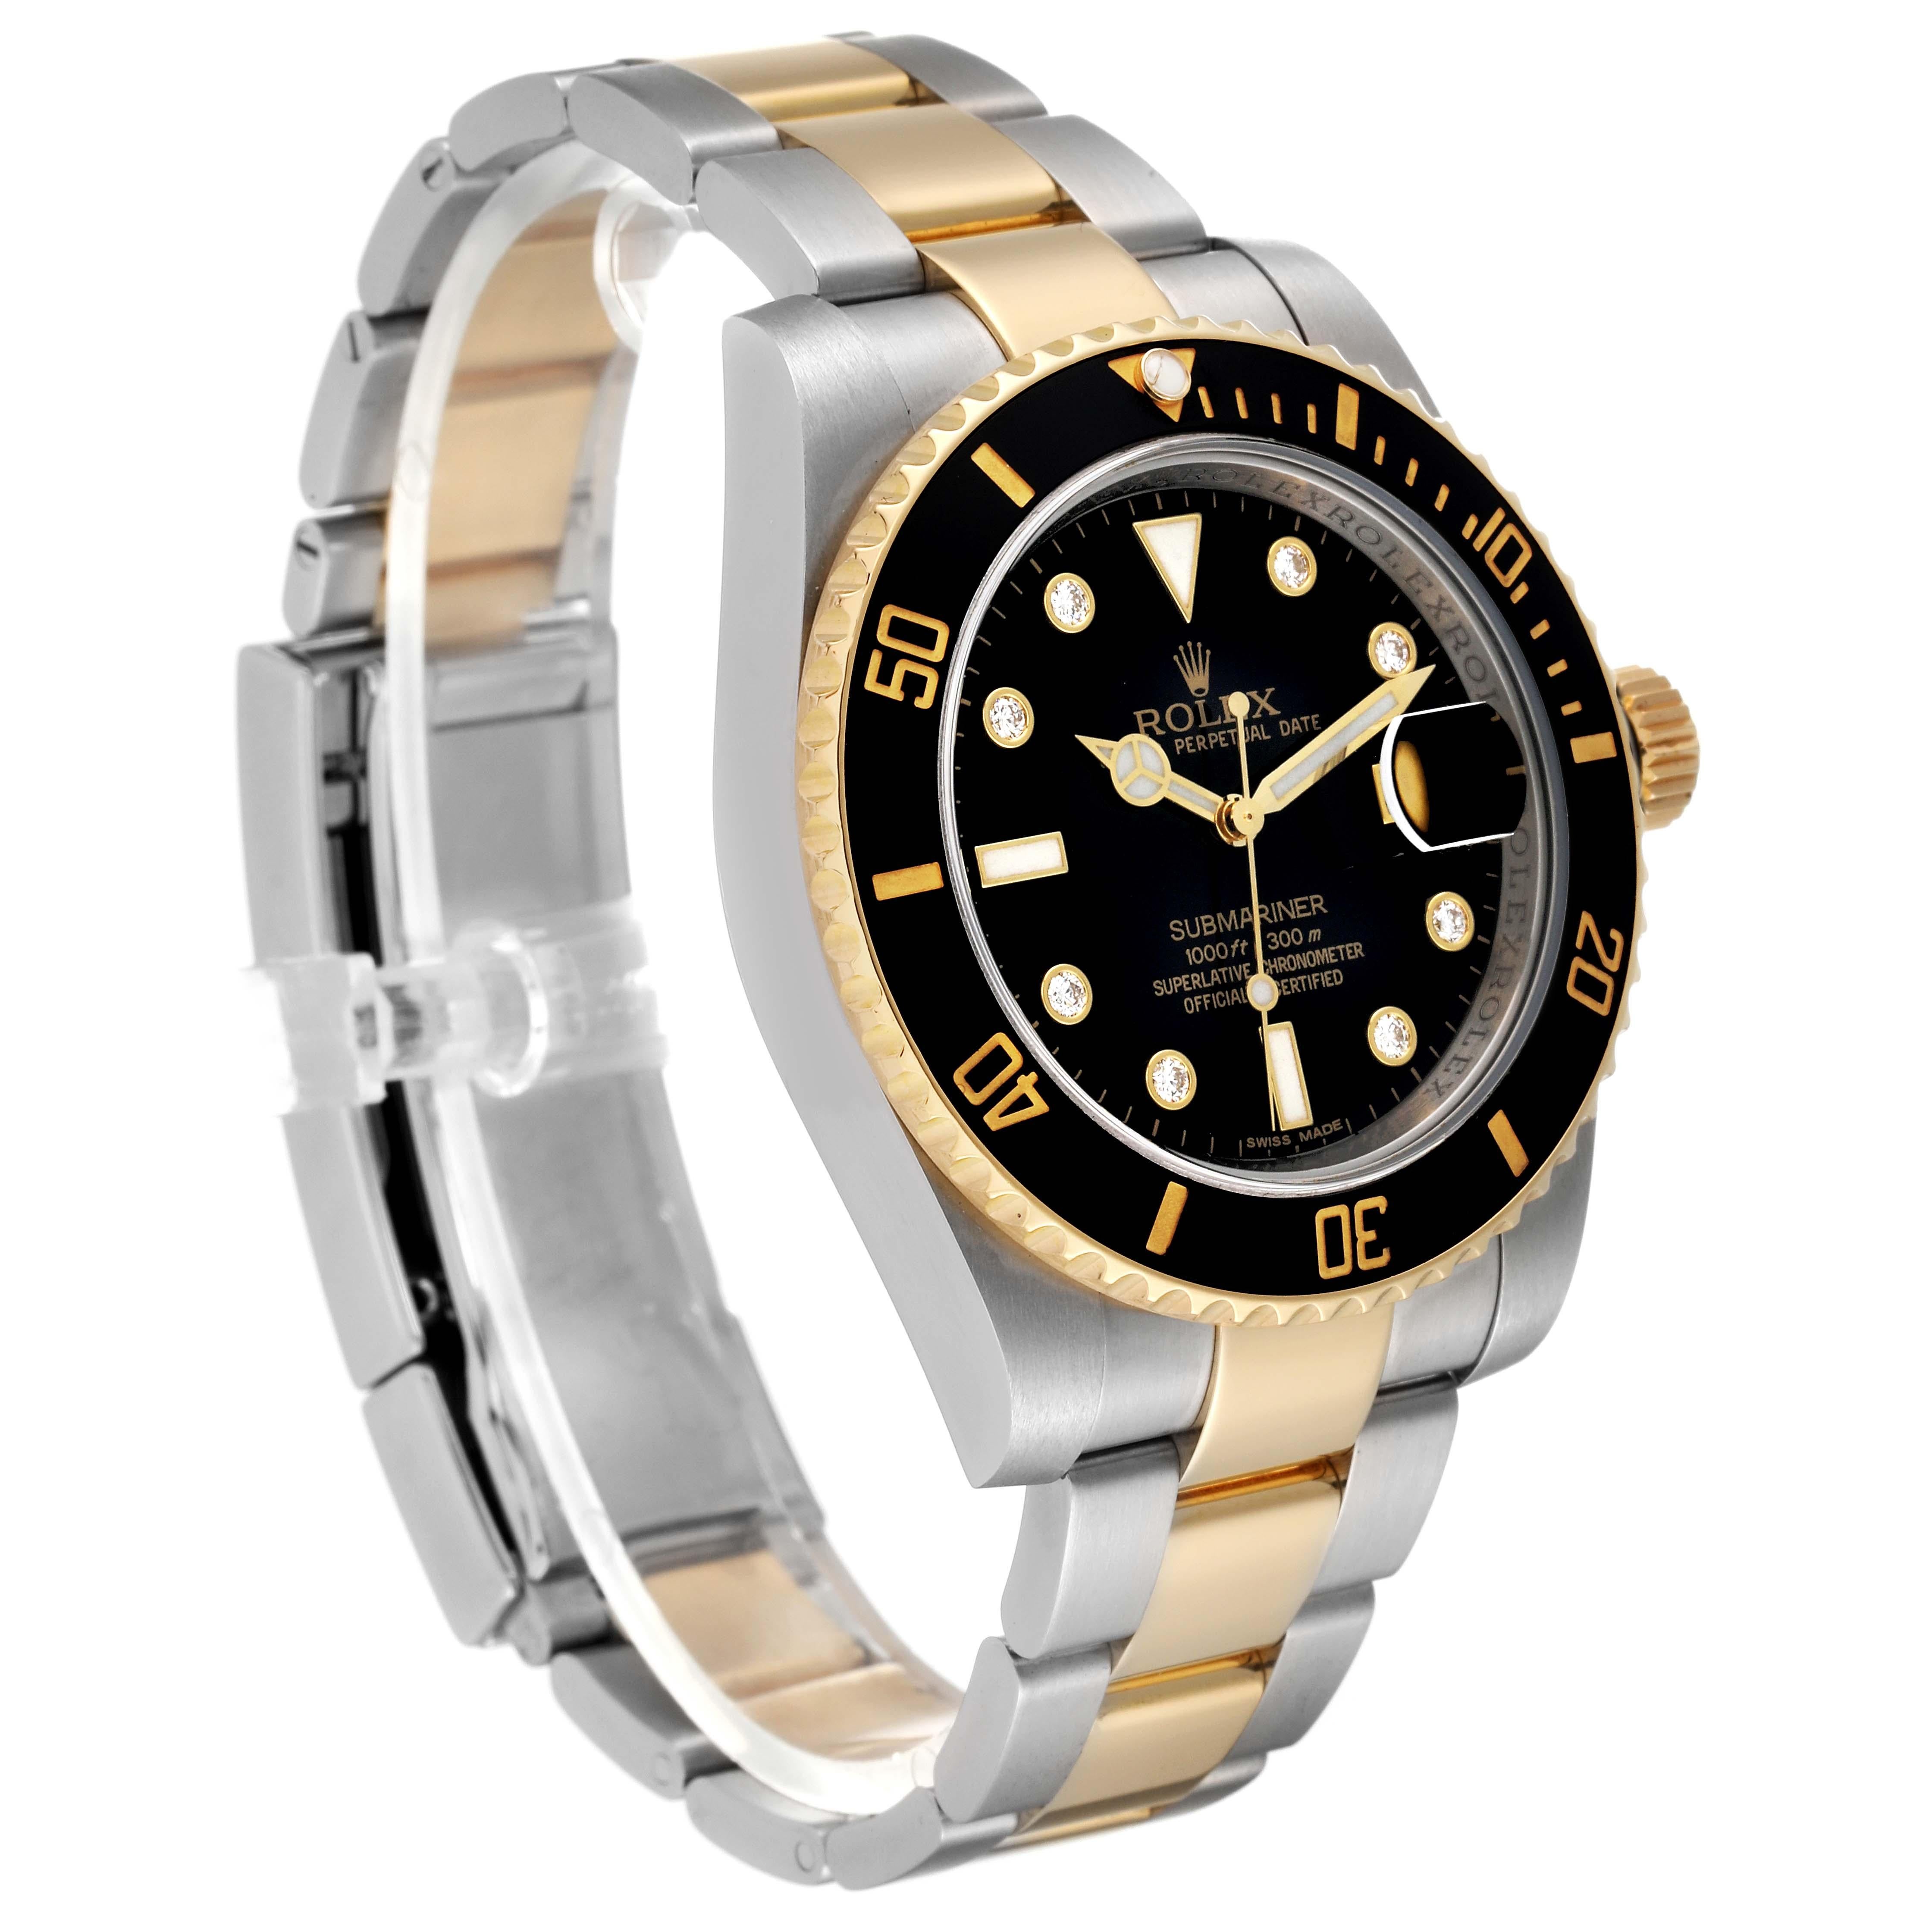 Men's Rolex Submariner Steel Yellow Gold Black Diamond Dial Mens Watch 116613 Box Card For Sale